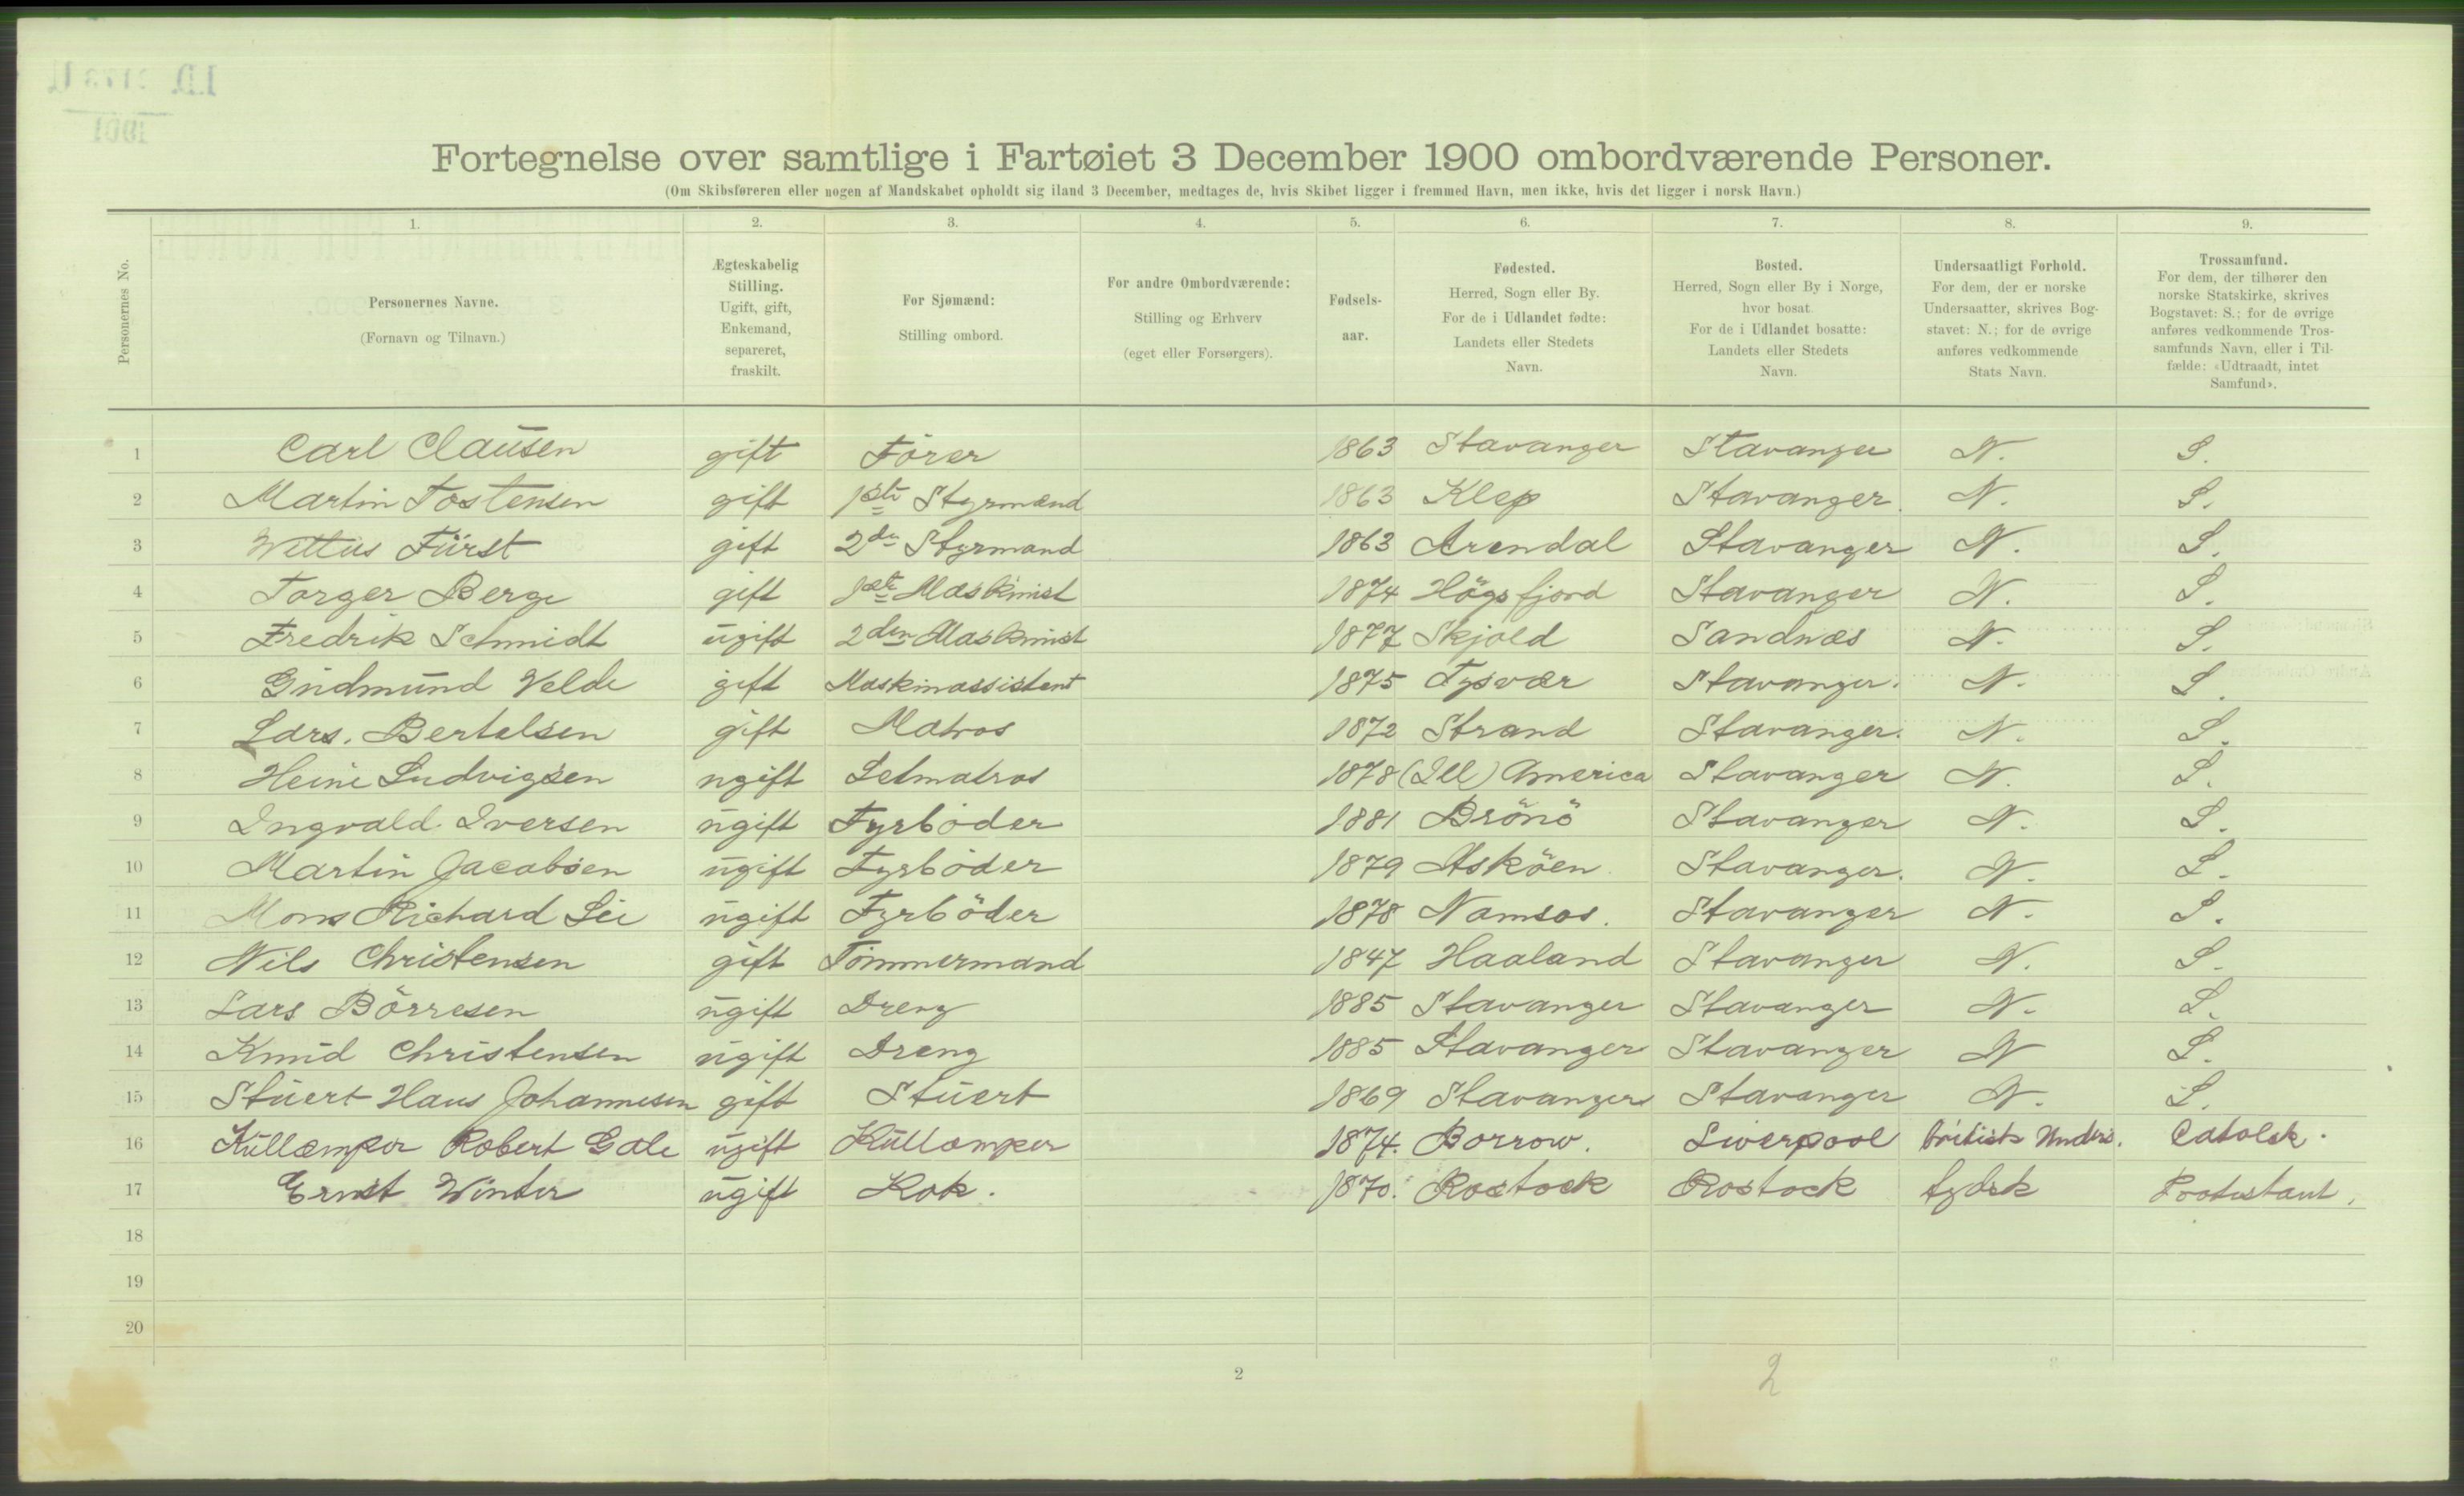 RA, 1900 Census - ship lists from ships in Norwegian harbours, harbours abroad and at sea, 1900, p. 4694